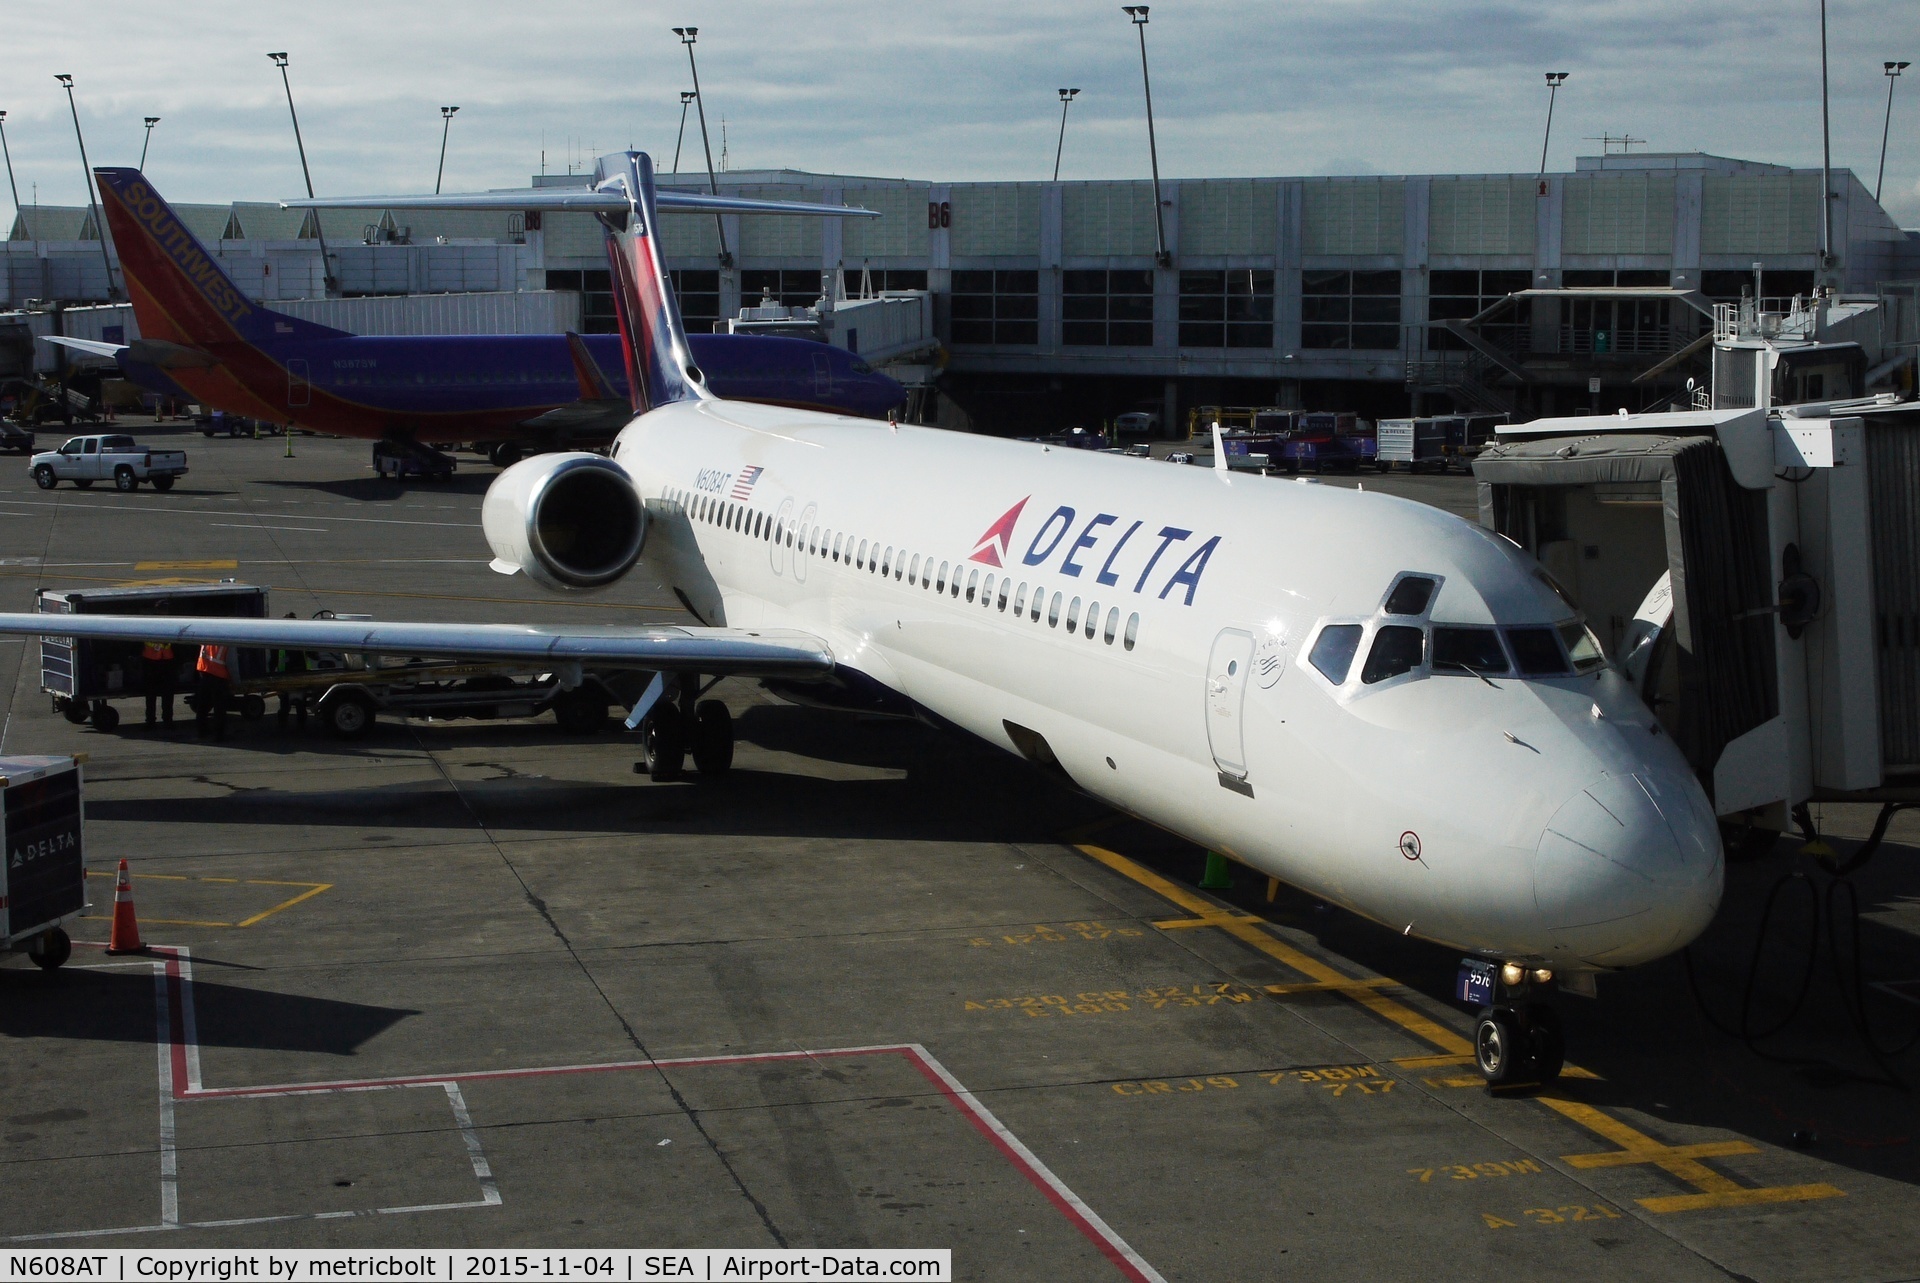 N608AT, 2000 Boeing 717-200 C/N 55081, Now in Delta colours